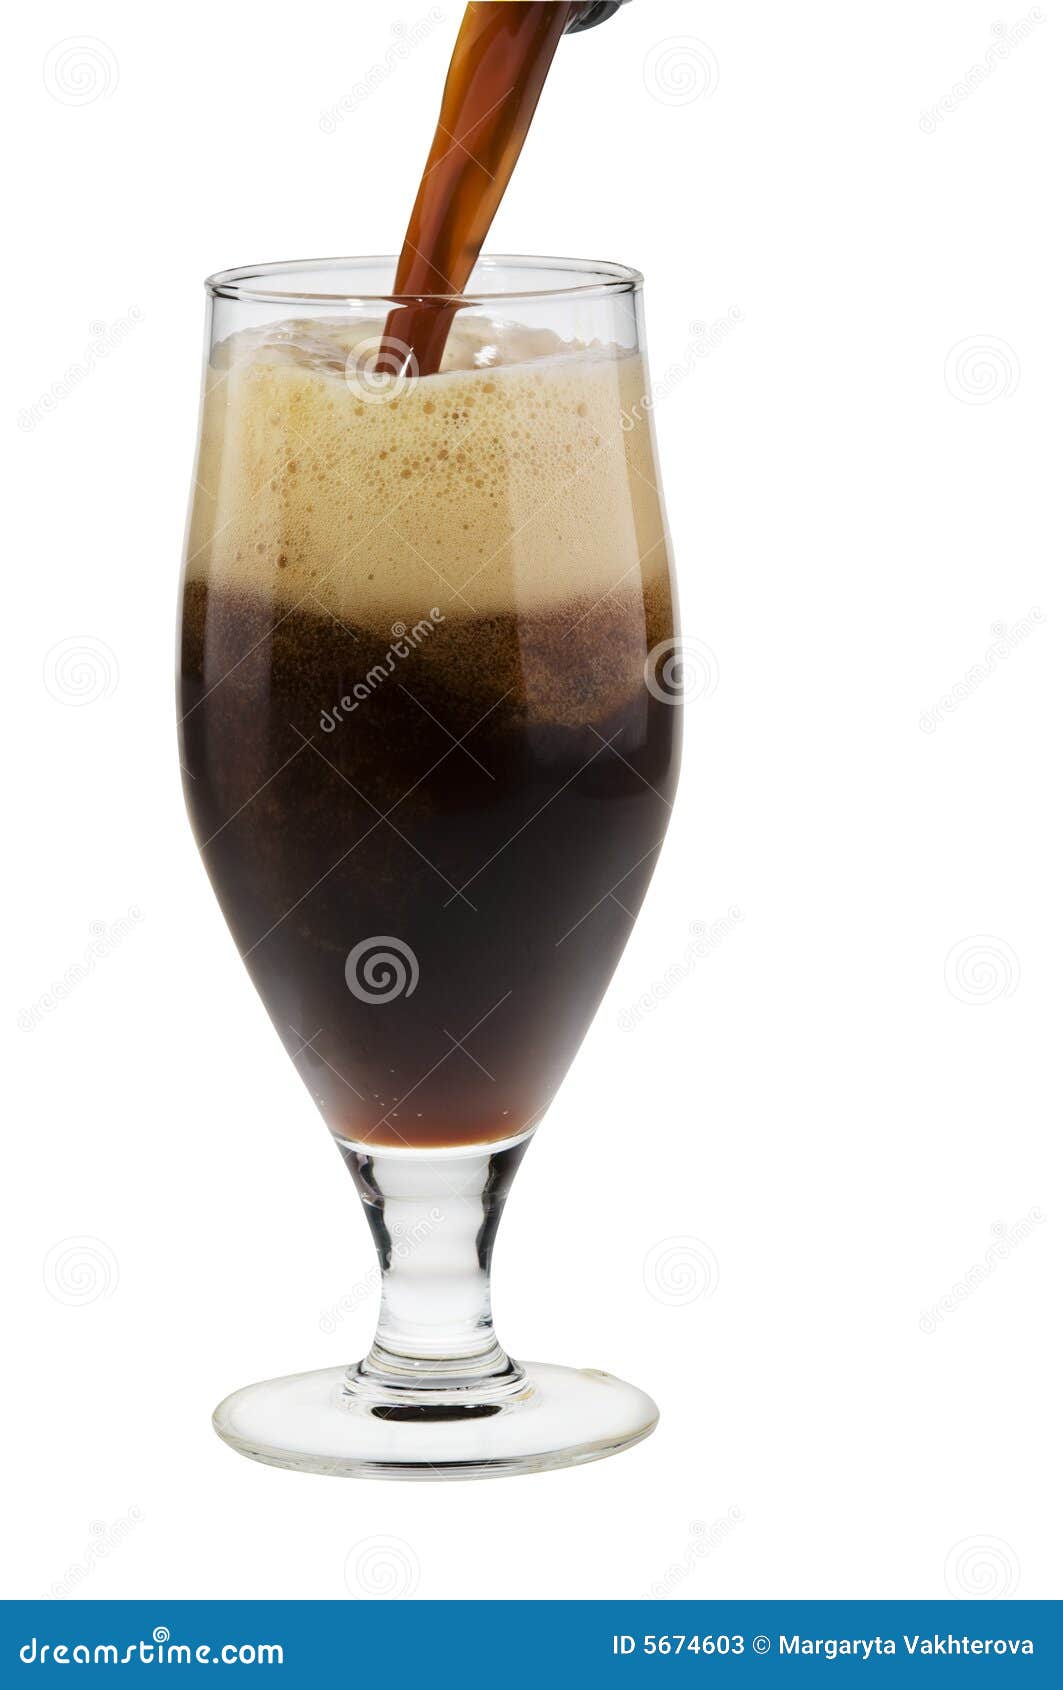 alcohol dark beer with froth pouring into a glass